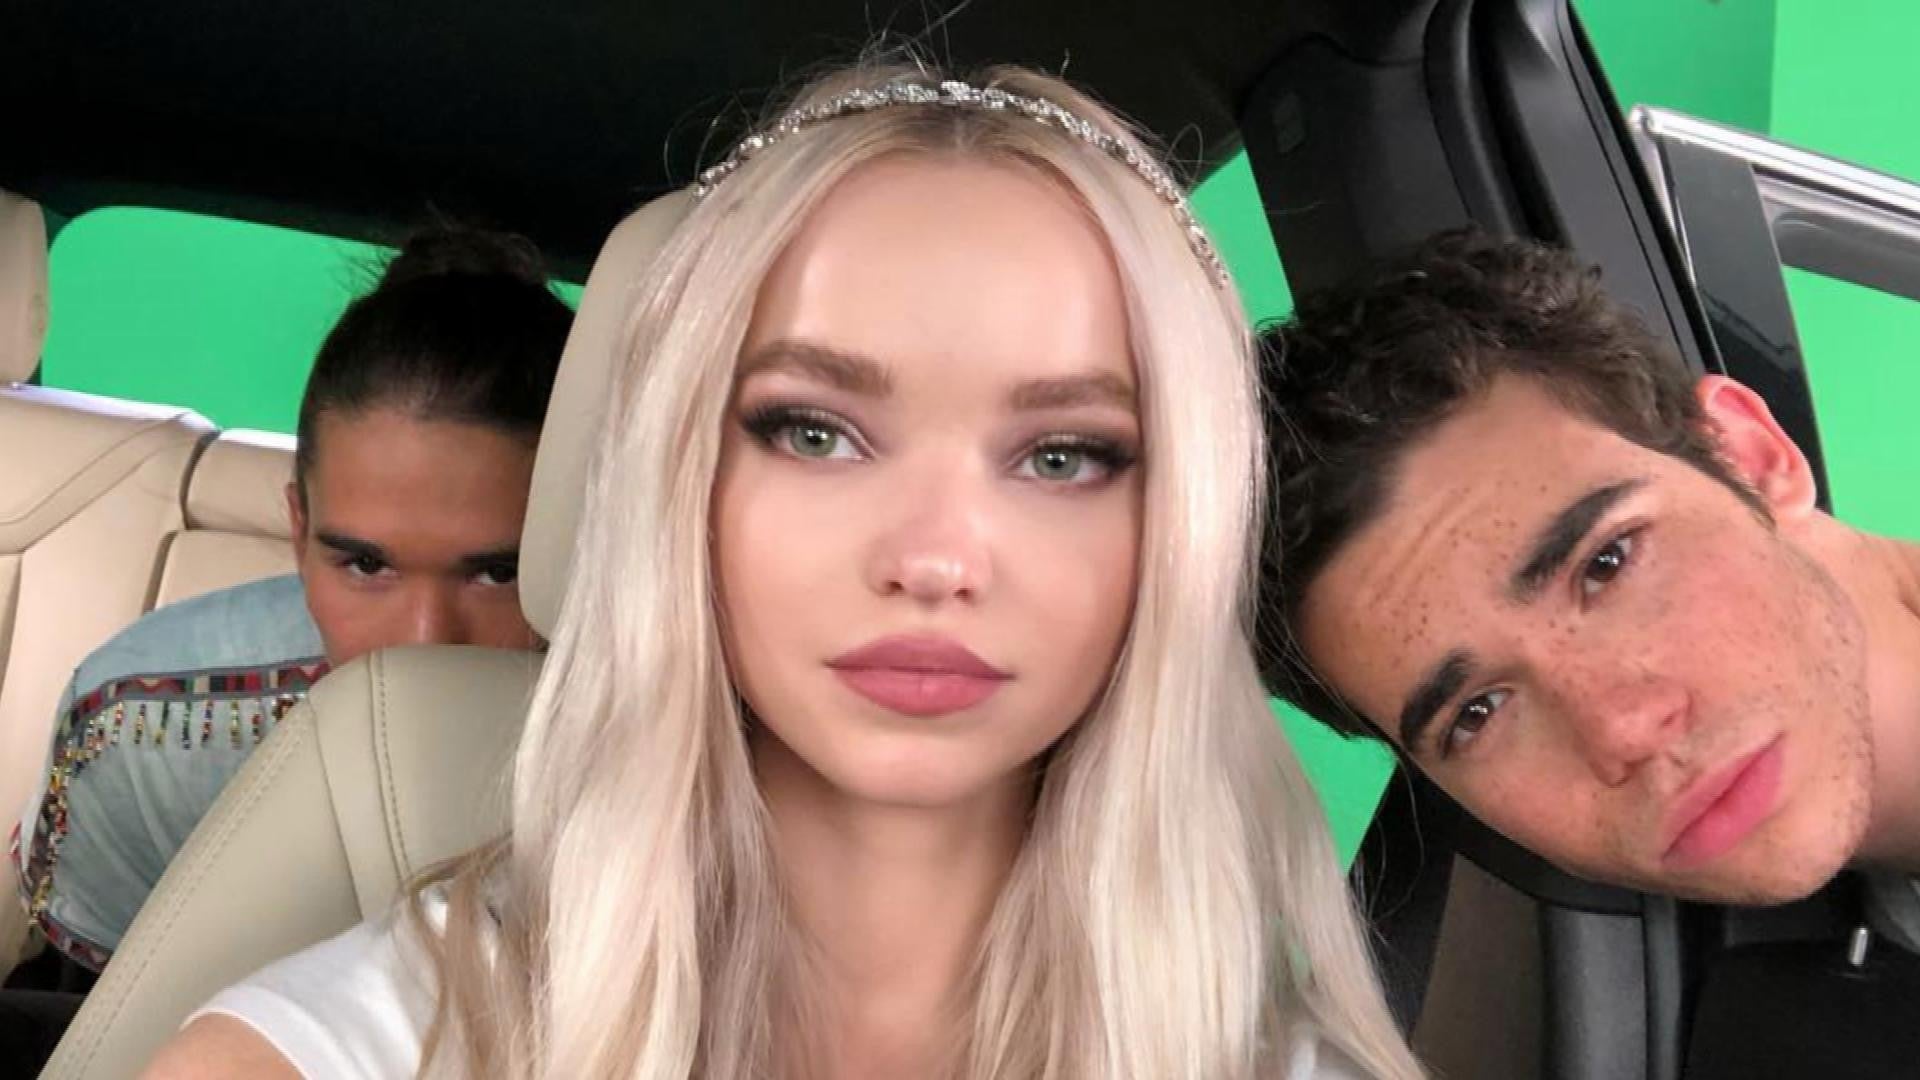 Sunday Conversation: Dove Cameron On Finding Her Voice And People